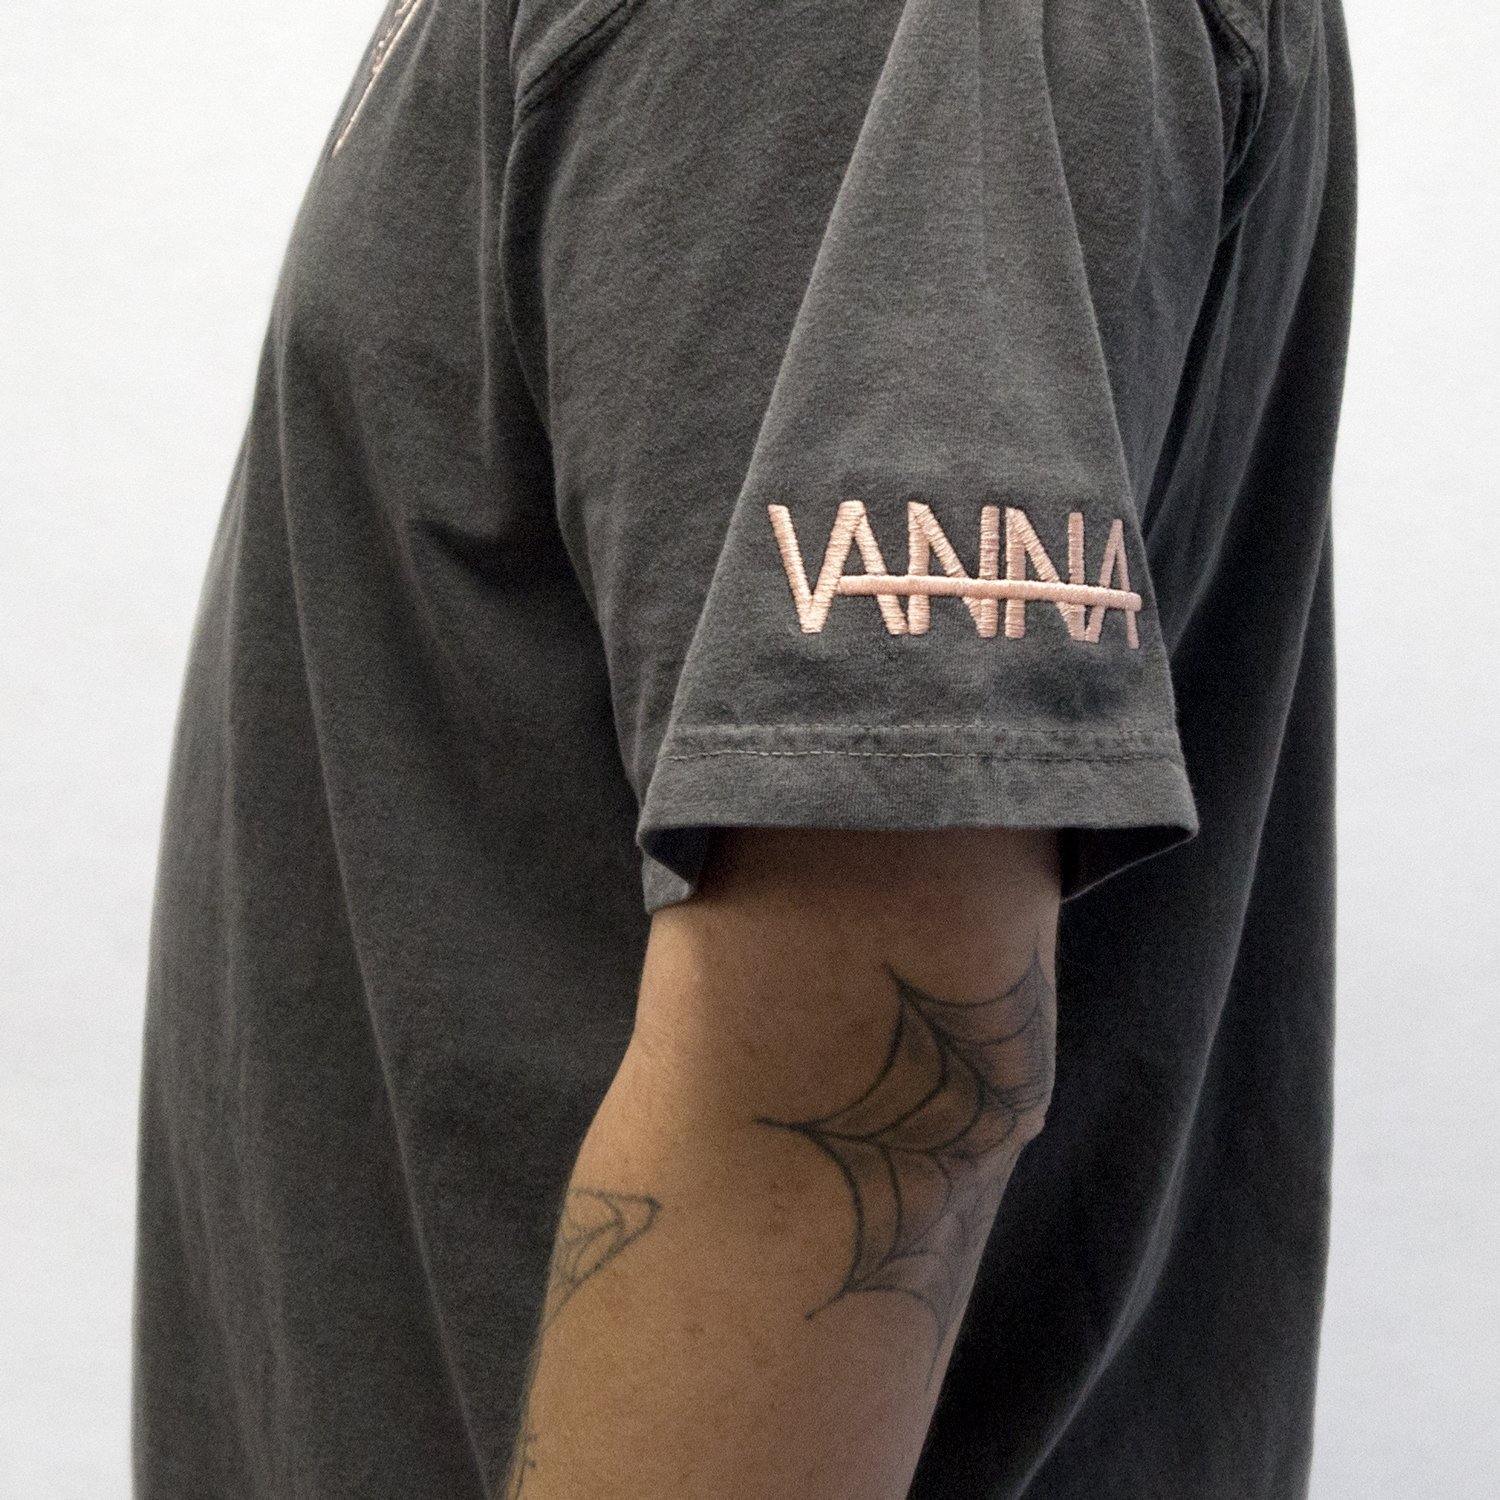 Buy – Vanna "All Hell" Embroidered Shirt – Band & Music Merch – Cold Cuts Merch